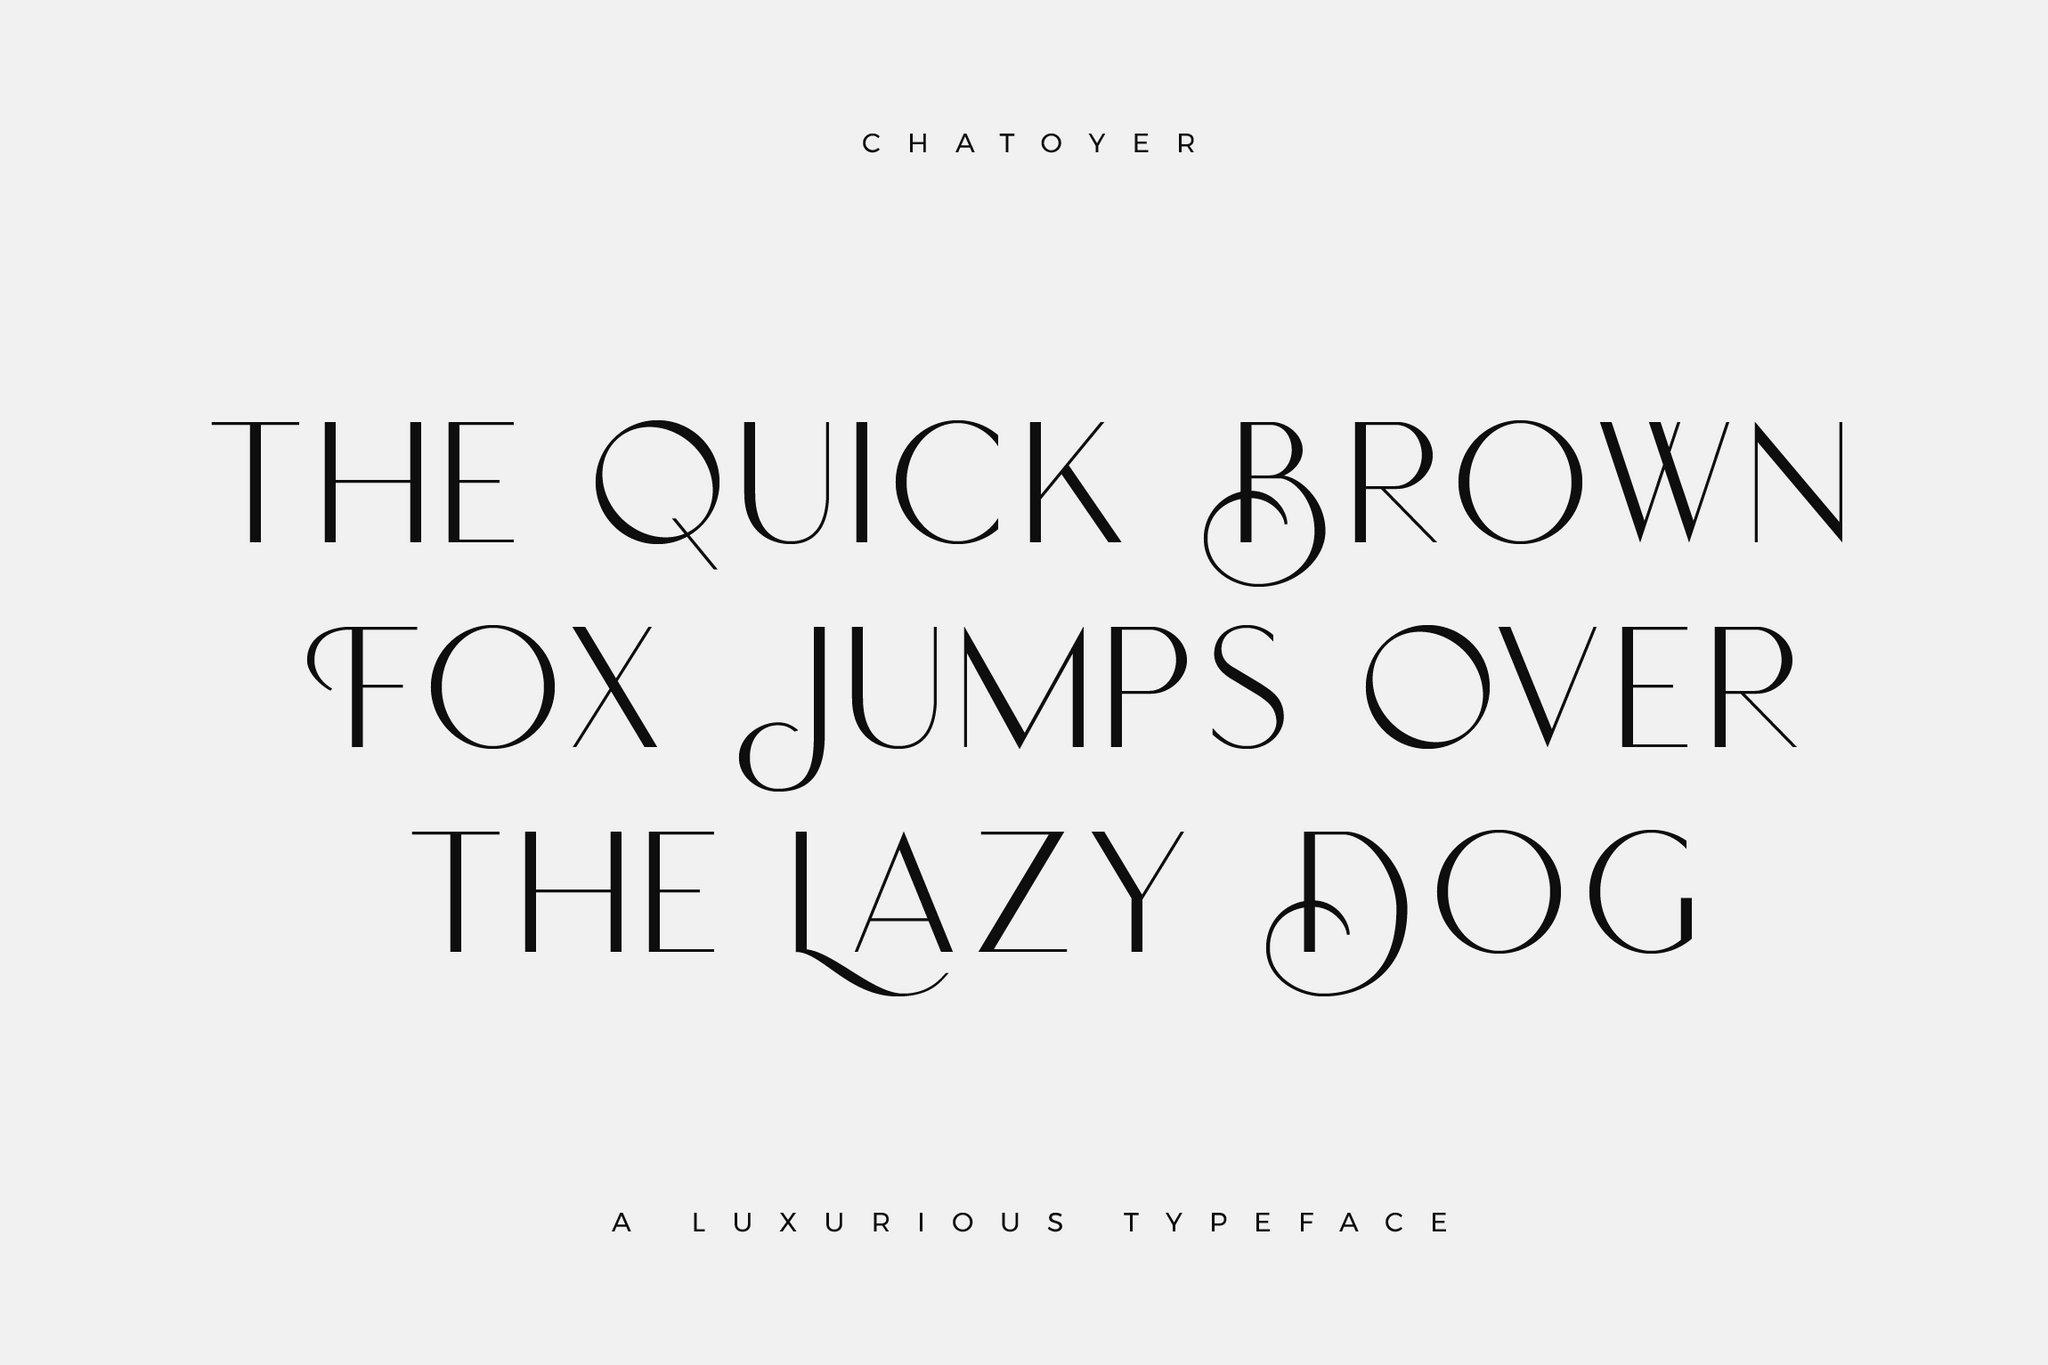 Chatoyer - A Luxurious Typeface included in the Classic Font Bundle